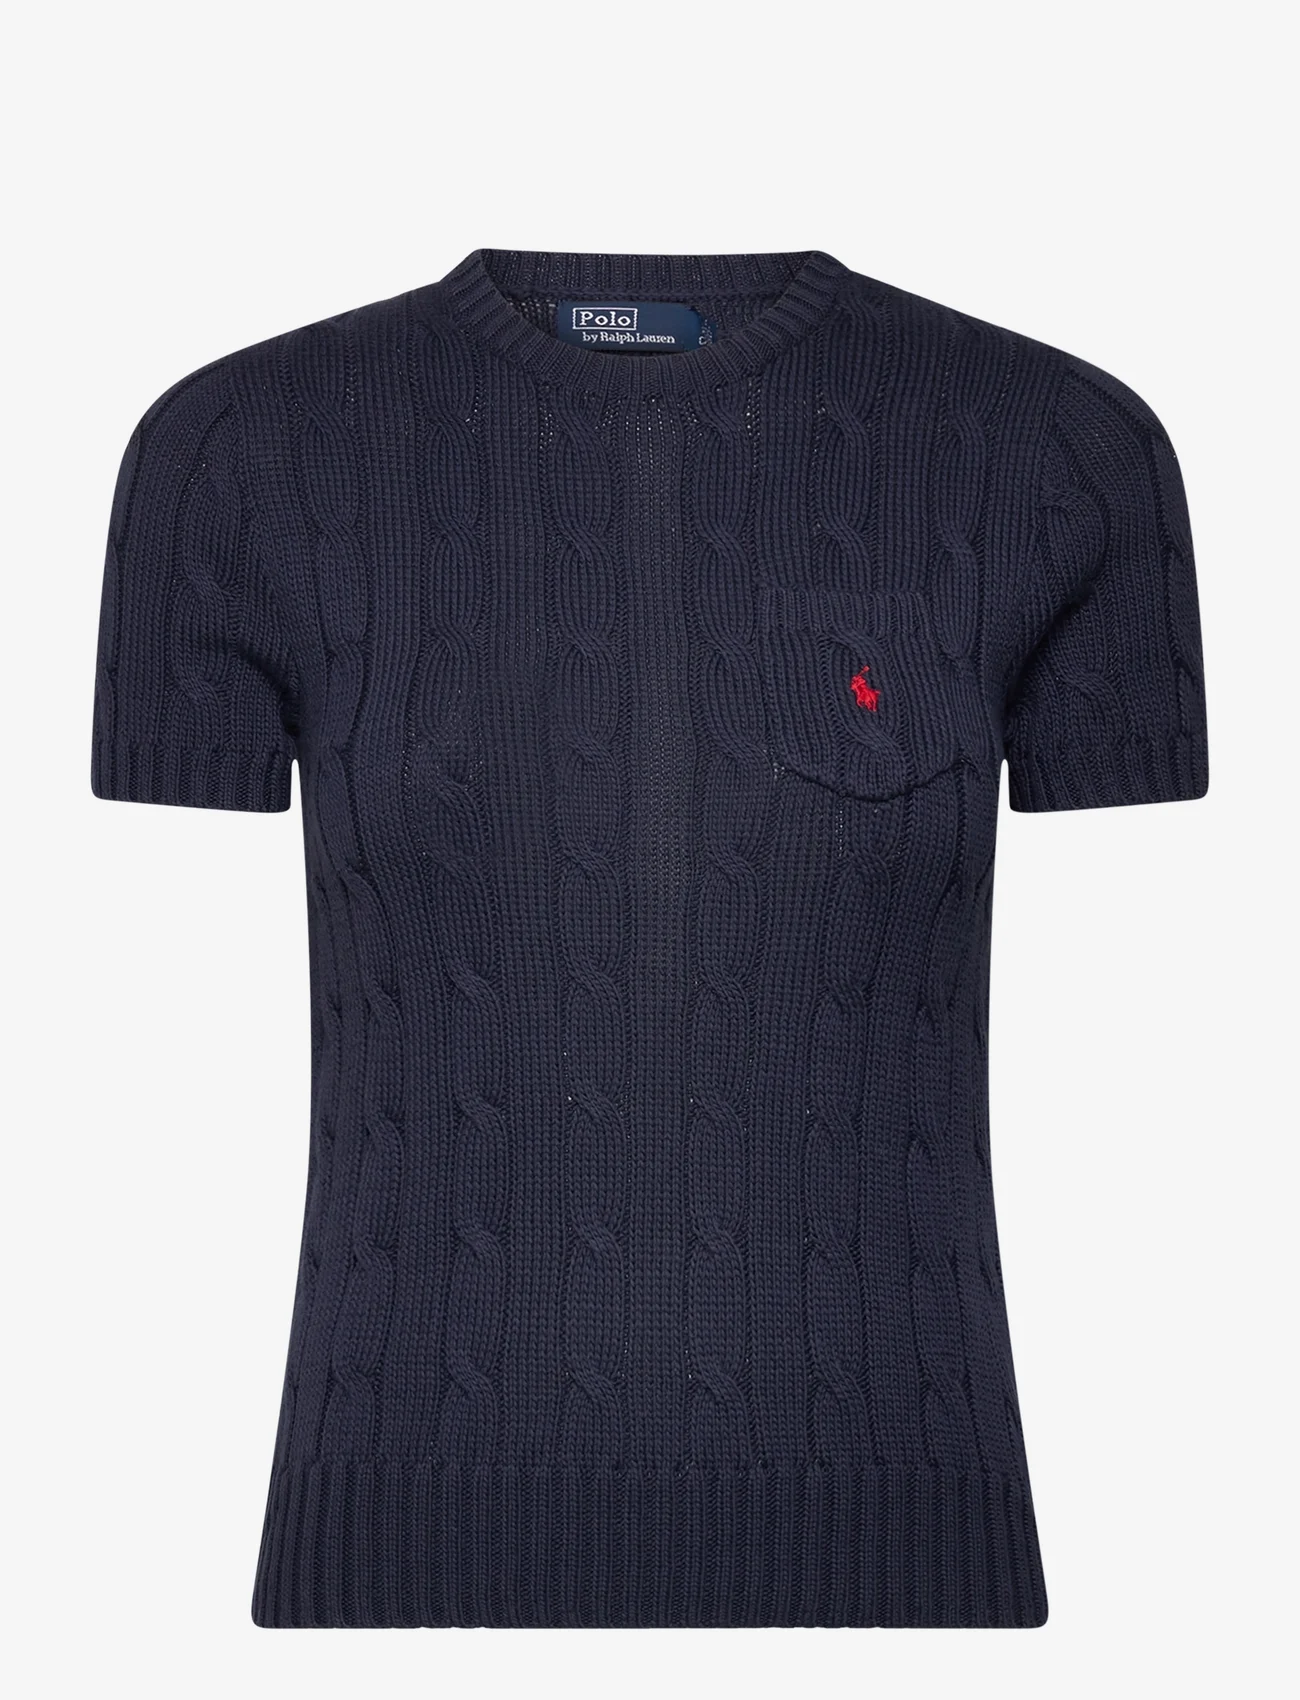 Polo Ralph Lauren - Cable-Knit Cotton Short-Sleeve Sweater - jumpers - hunter navy - 0